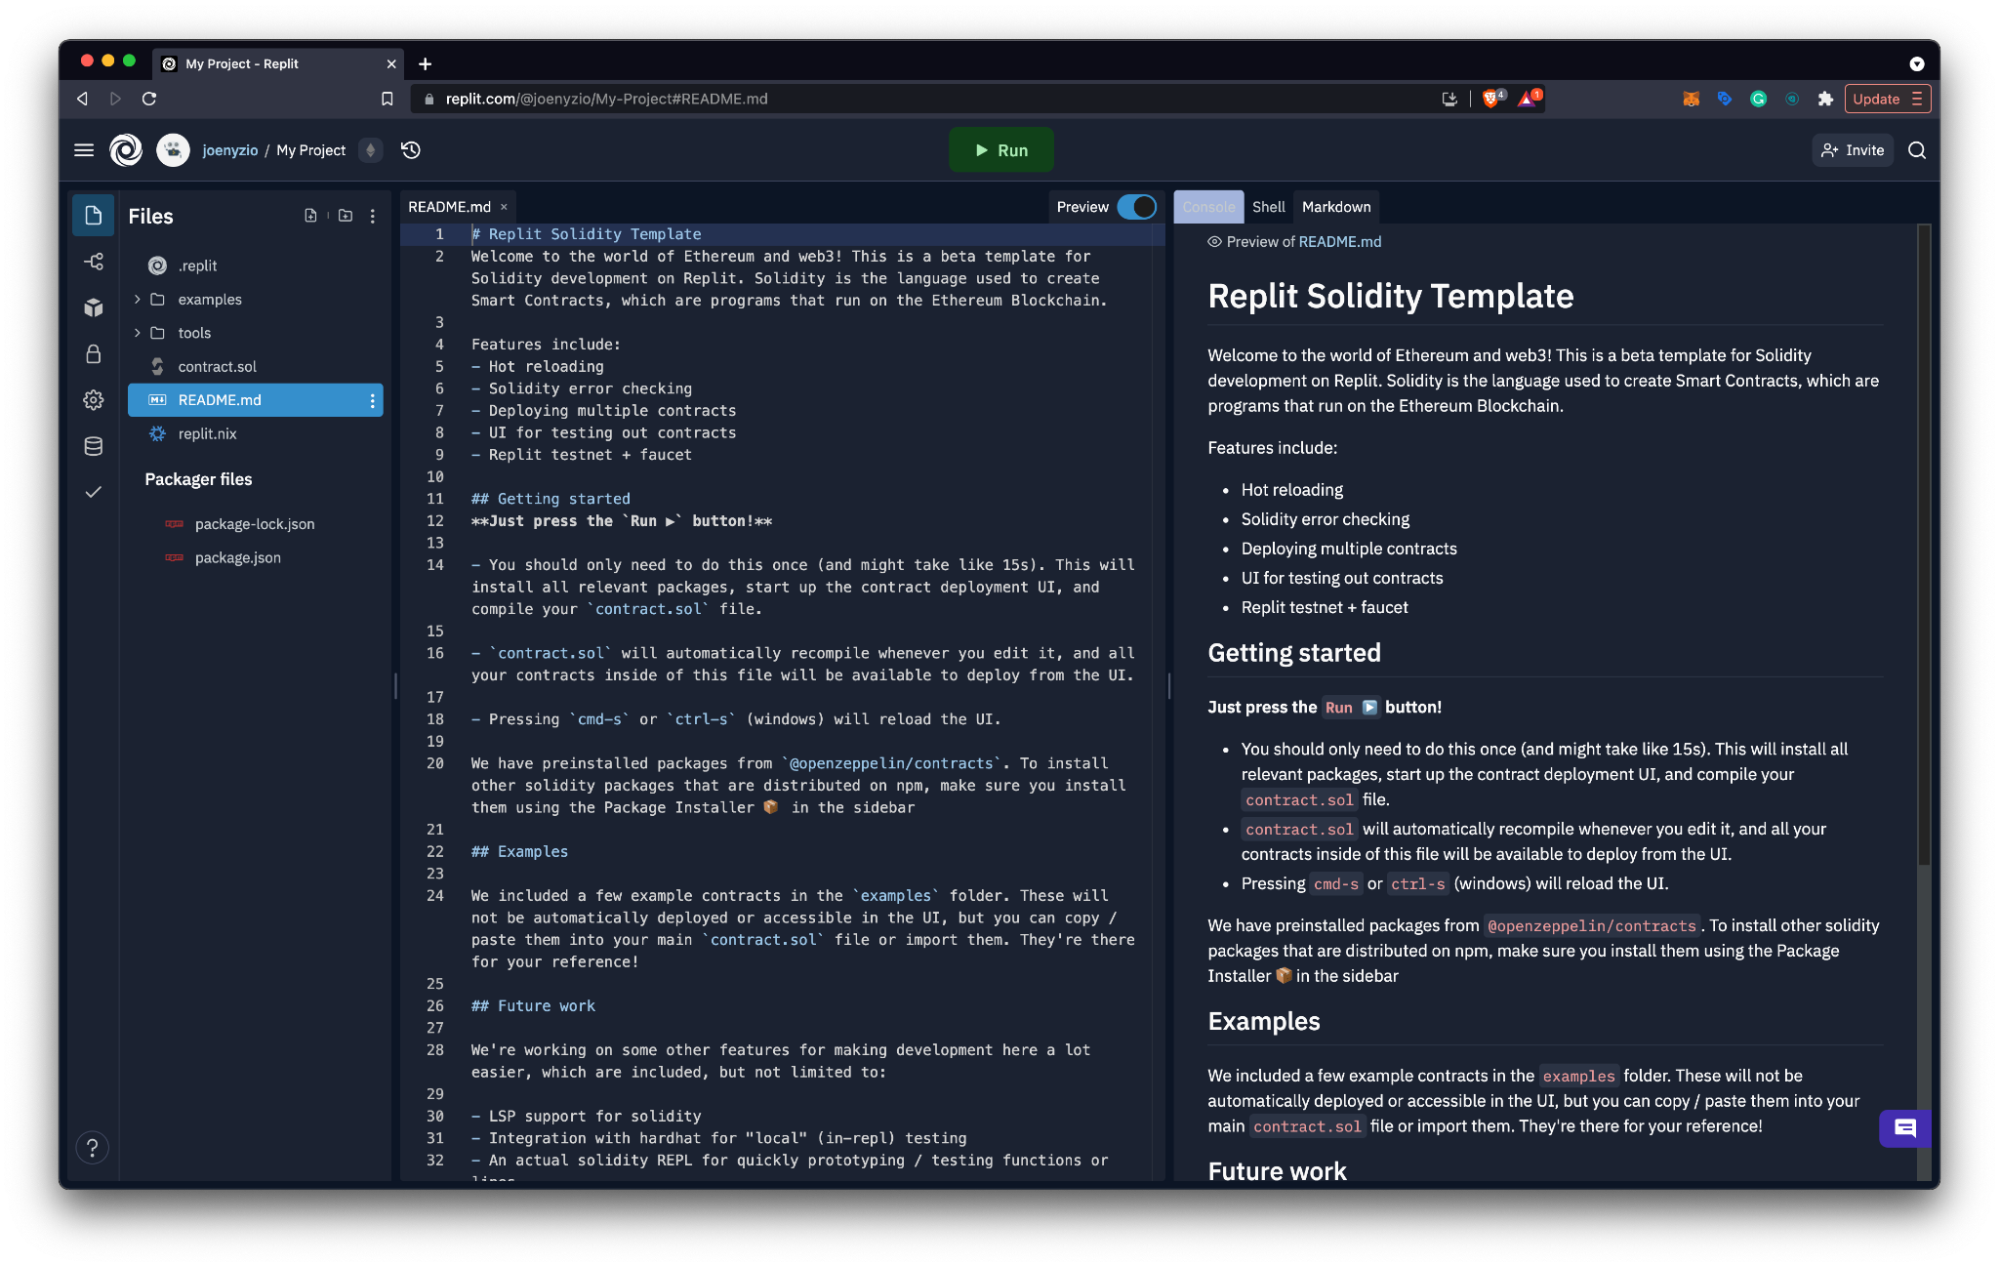 replit solidity template